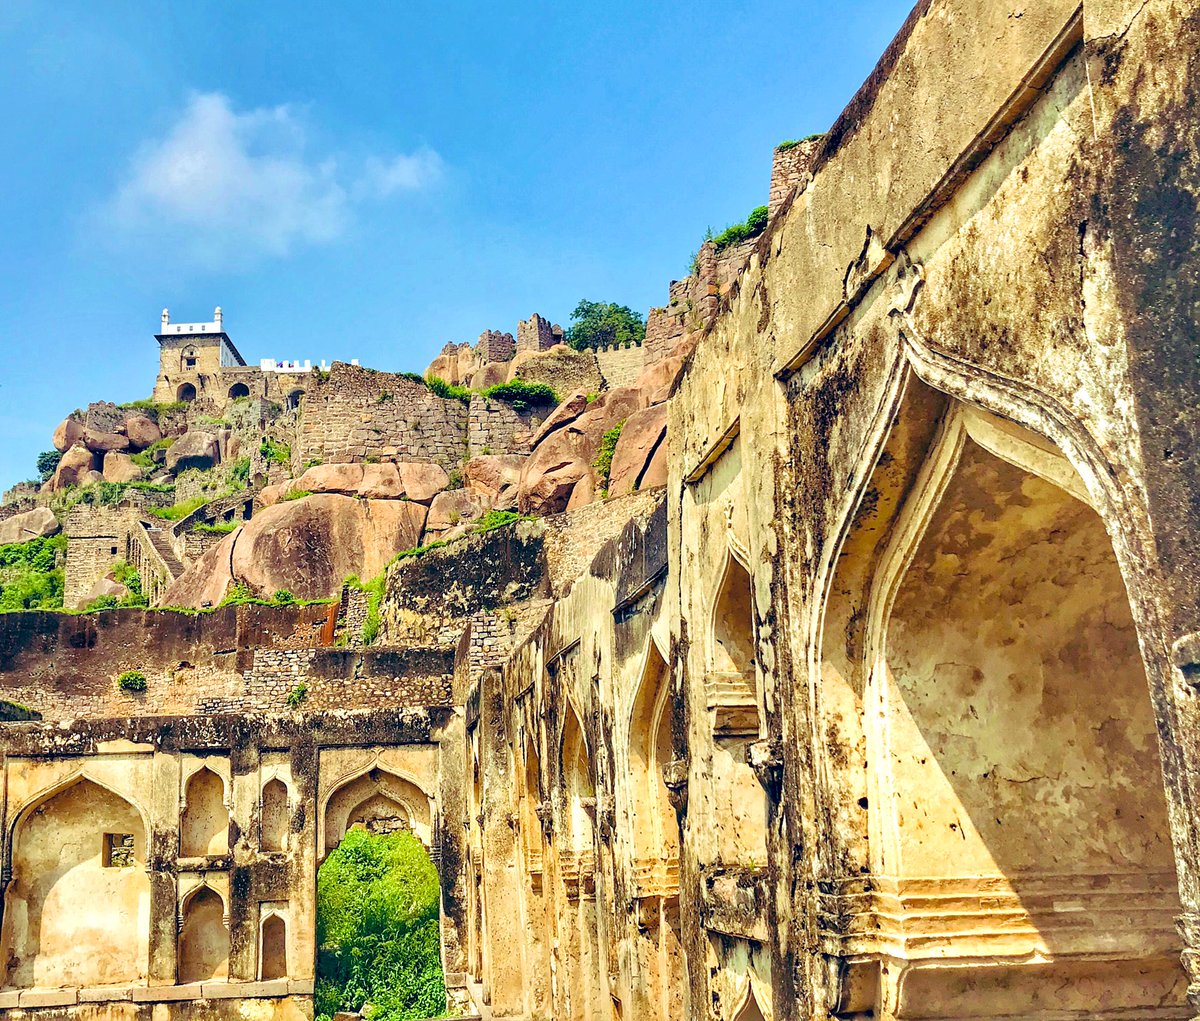 From the ramparts of the historic #GolcondaFort in #Hyderabad...